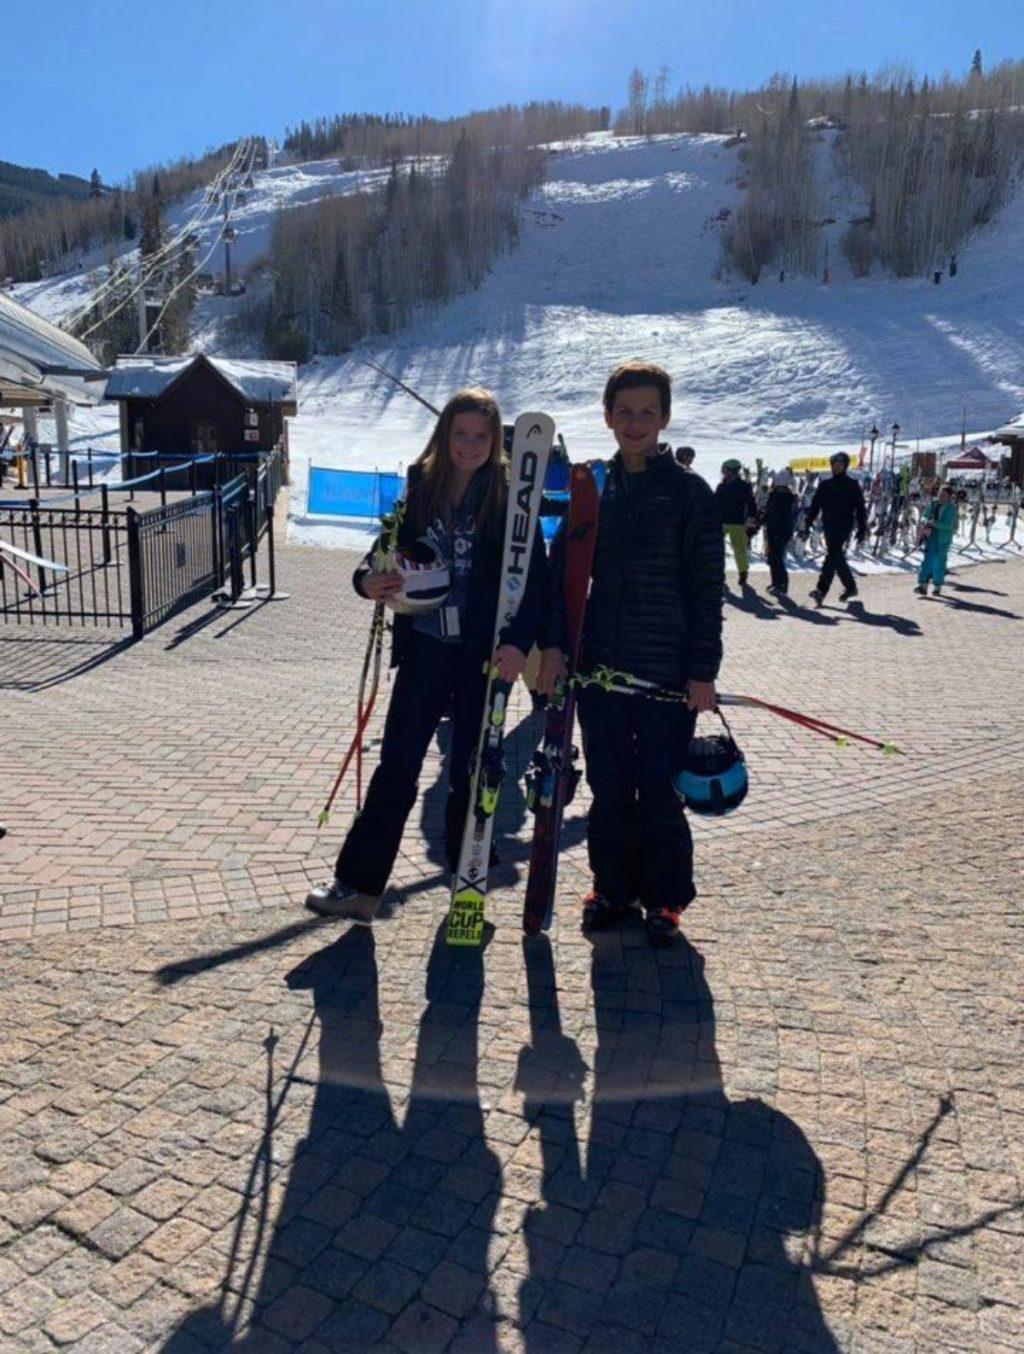 Cullen and her brother Blaine stand at the base of Vail, Colo. after a day of skiing in 2018. Cullen said she constantly skied all throughout middle school and continued a bit in high school.